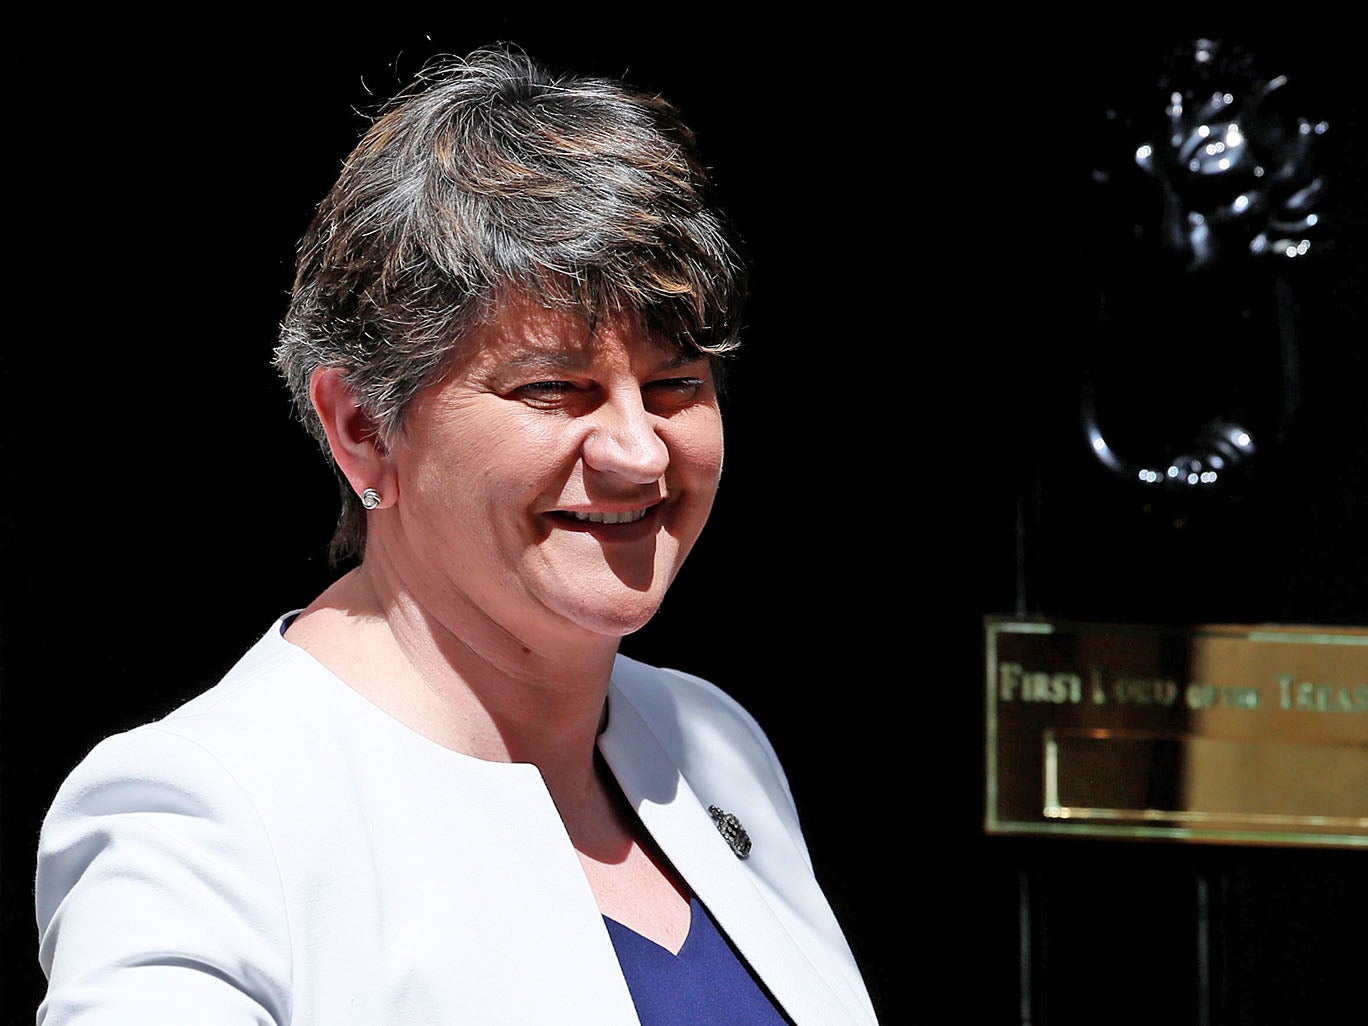 DUP leader Arlene Foster is meeting Theresa May for talks at Downing Street